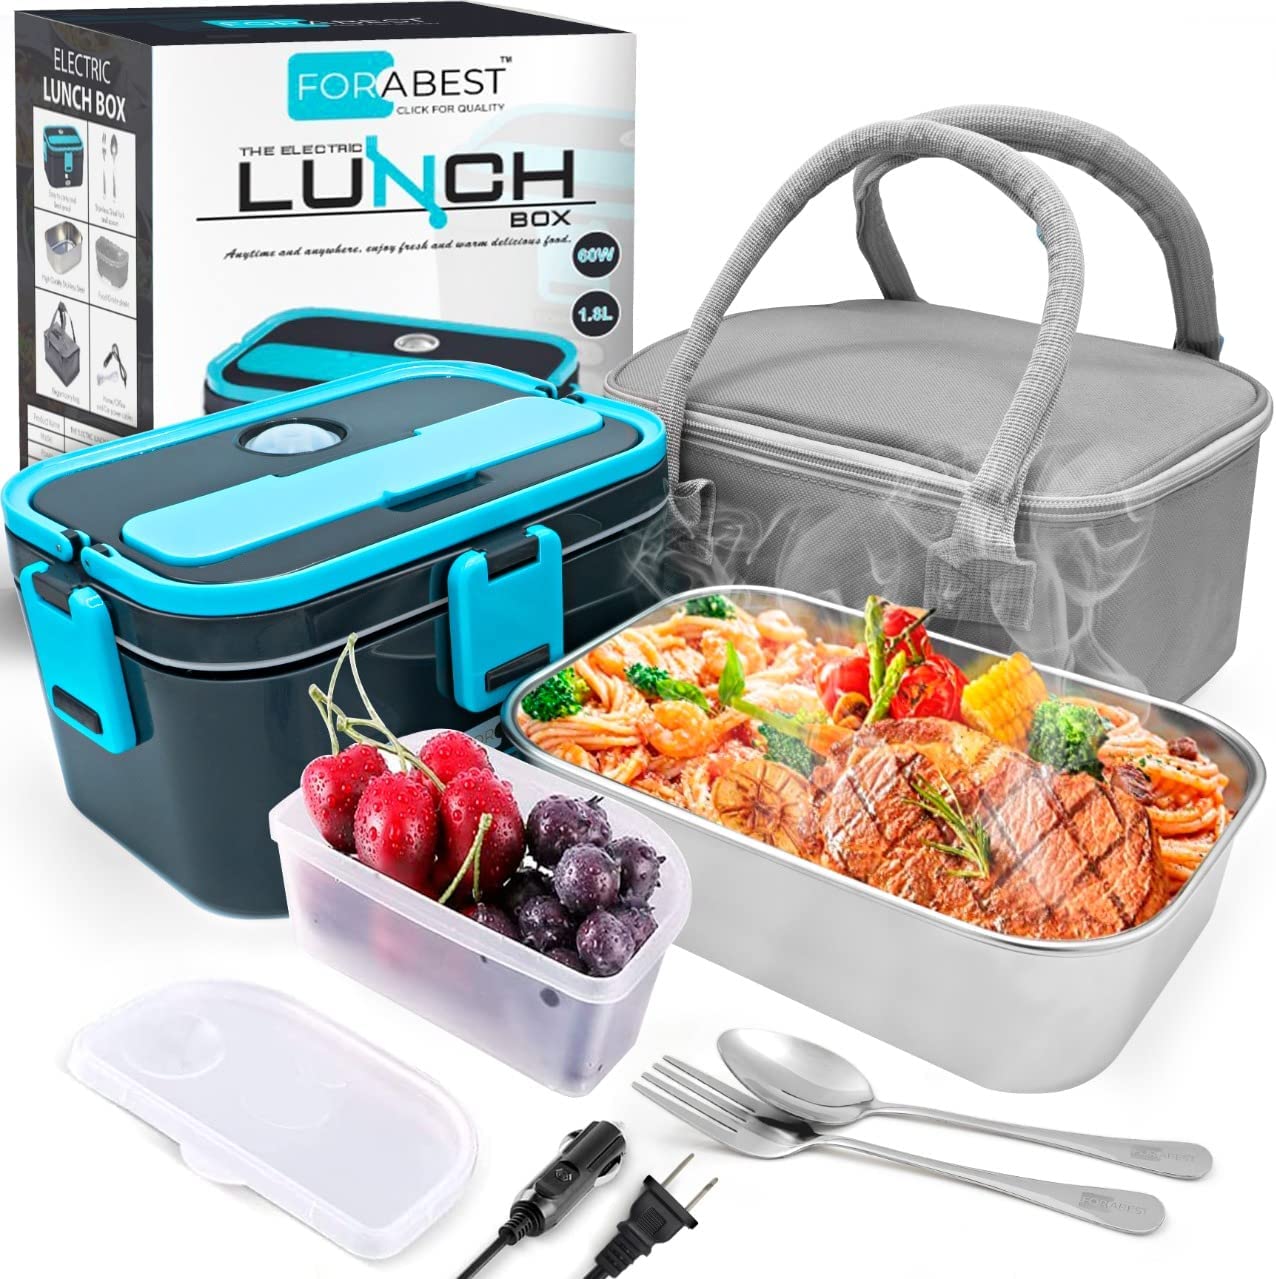 FORABEST 1.8L Electric Lunch Box- Larger Upgraded 50W - Dark Grey